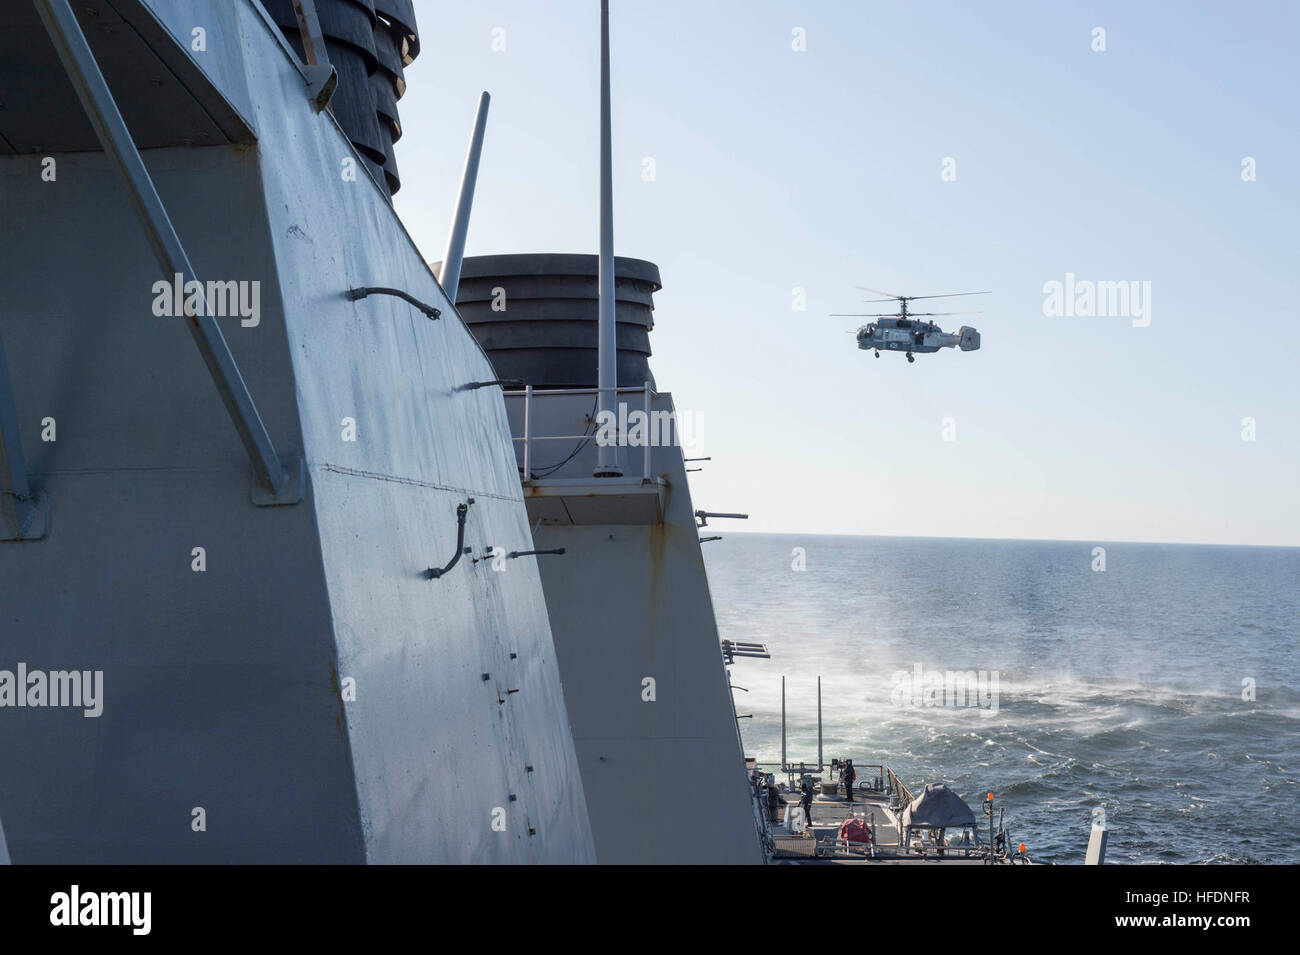 160412-N-00000-003 BALTIC SEA - A Russian Kamov KA-27 HELIX flies low-level passes near the Arleigh Burke-class guided missile destroyer USS Donald Cook (DDG 75) while the ship was operating in international waters Apr. 12, 2016. Donald Cook is forward deployed to Rota, Spain, and is conducting routine patrols in the U.S. 6th Fleet area of operations in support of U.S. national security interests in Europe.  (U.S. Navy photo/Released) A Russian Kamov KA-27 flies near the USS Donald Cook (DDG 75) Stock Photo